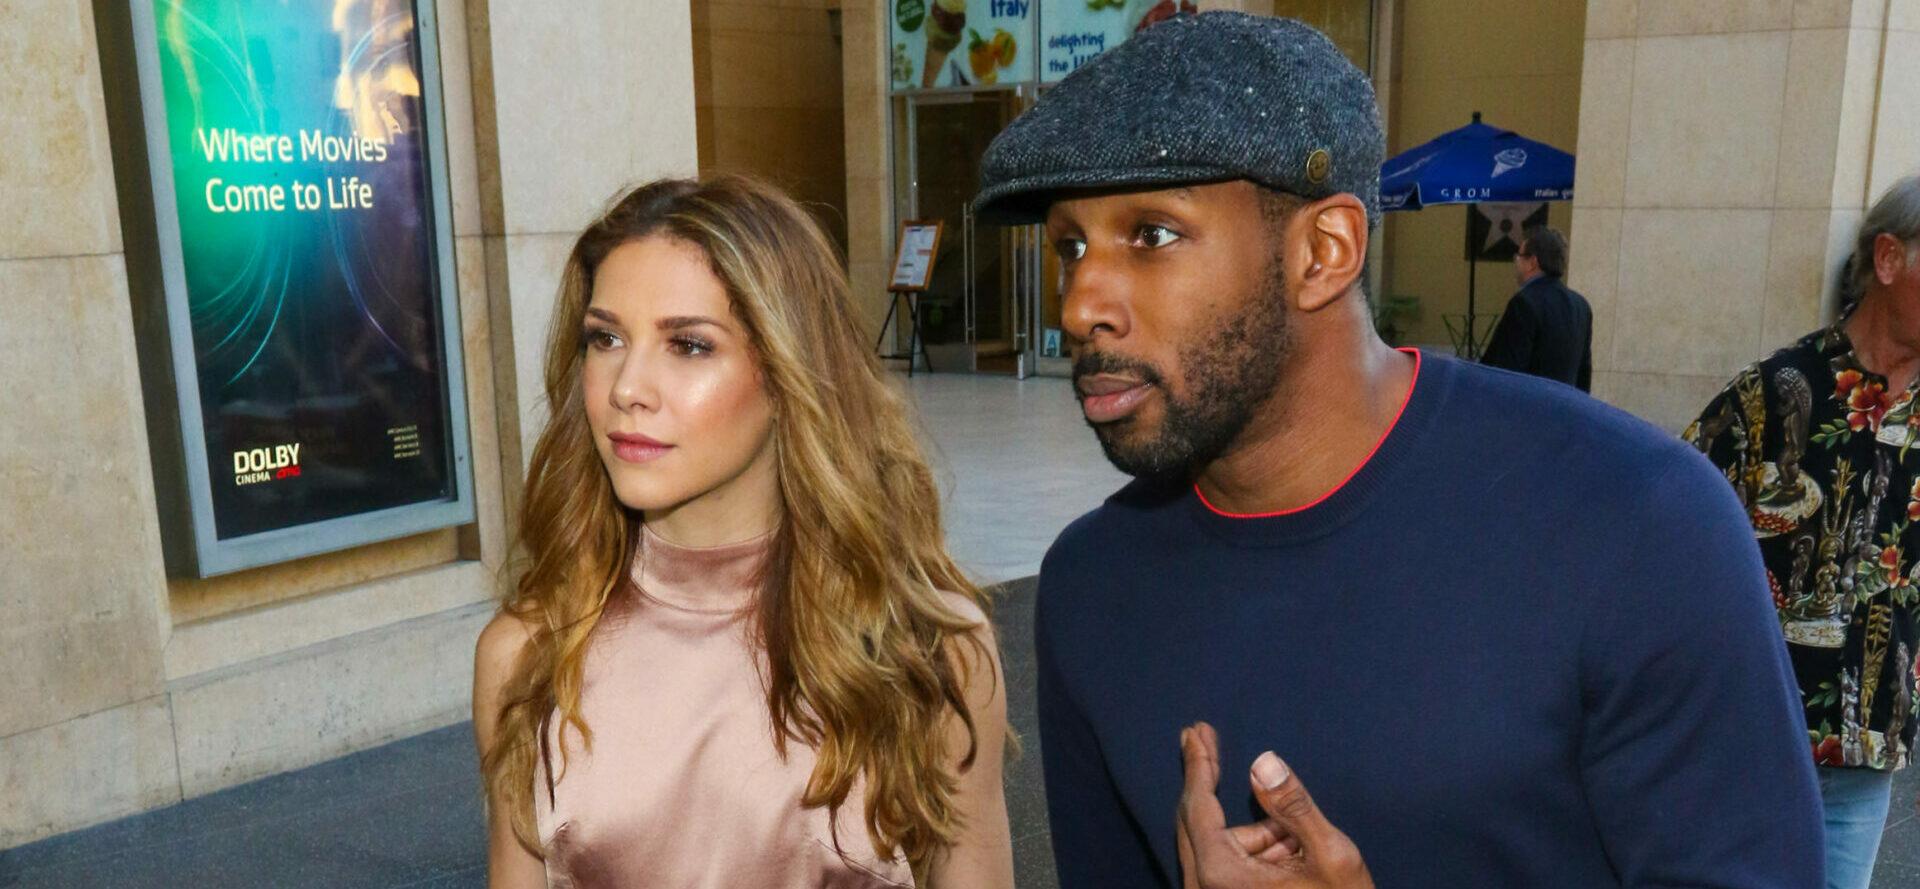 Allison Holker and Stephen Twitch Boss sightings outside TCL Chinese Theatre